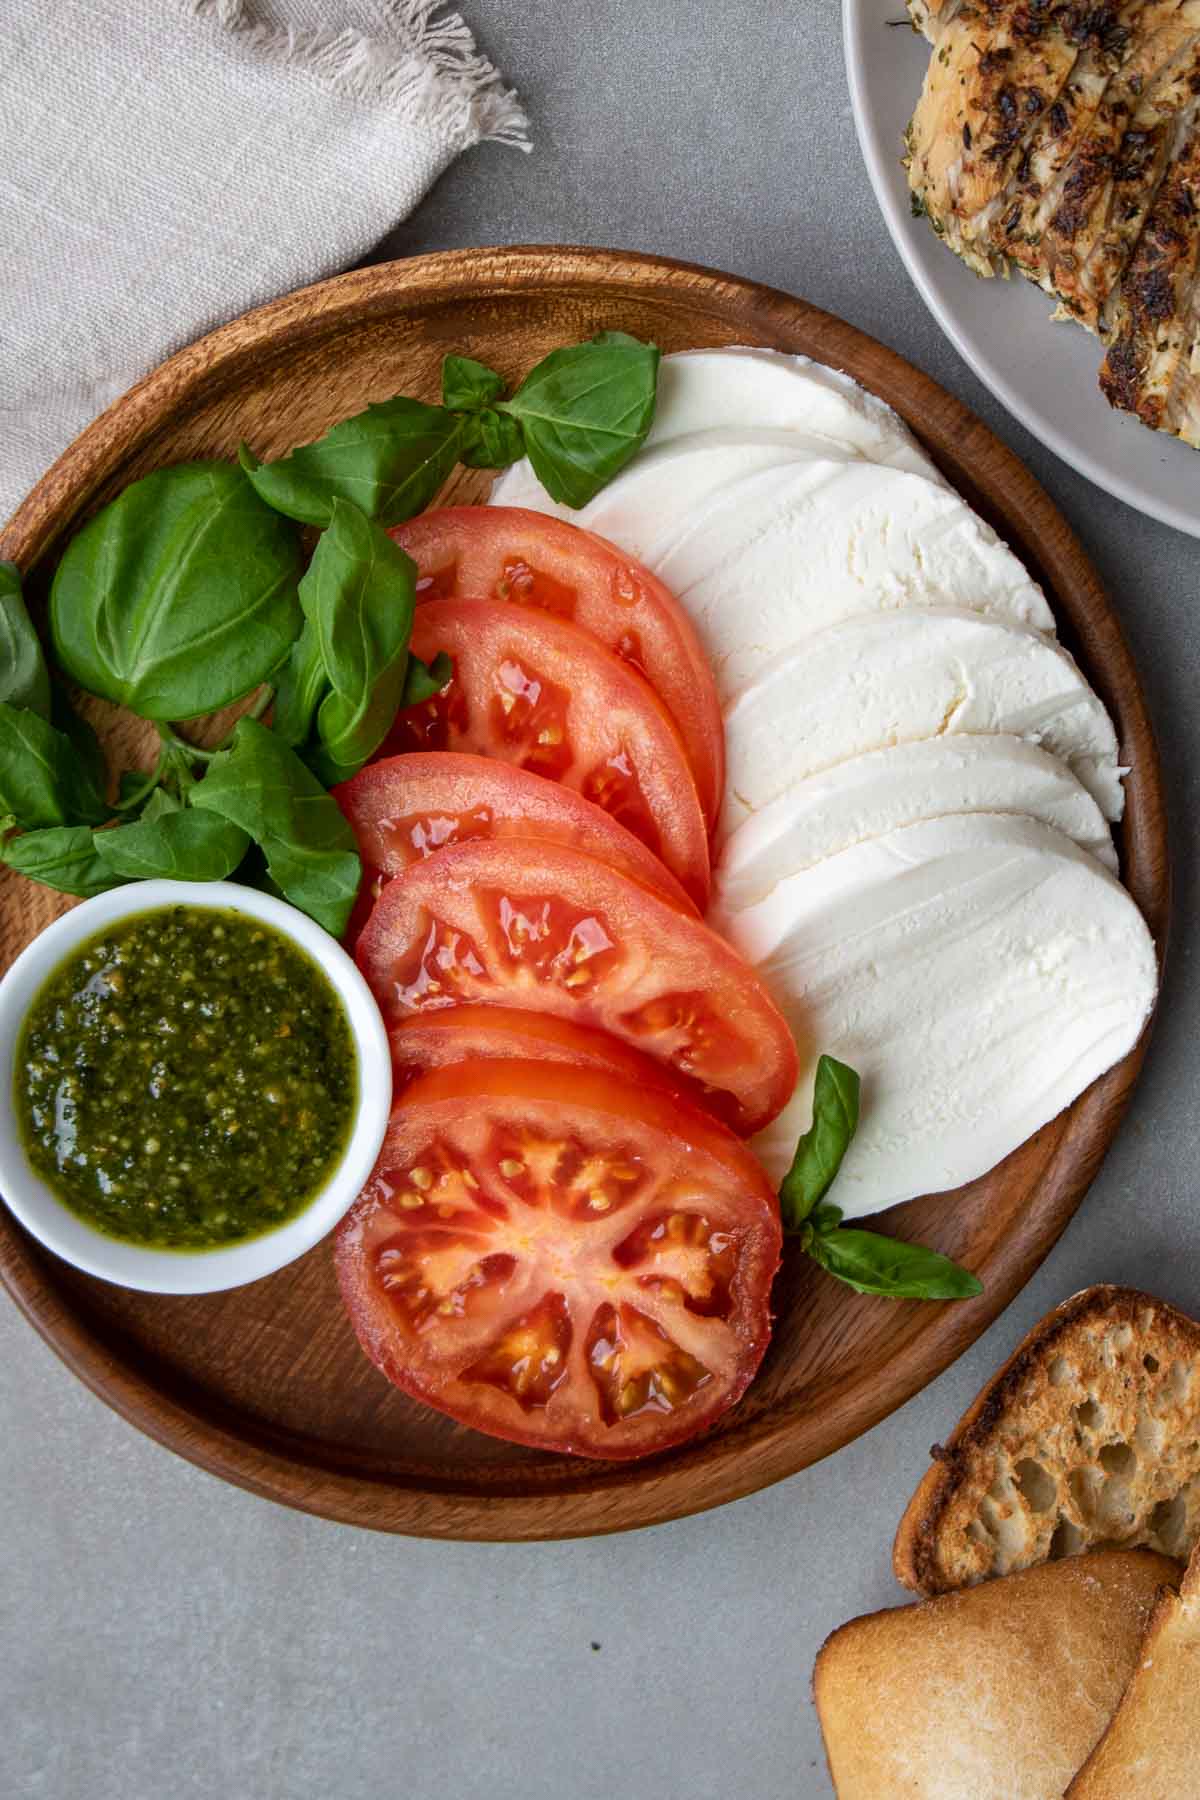 Ingredients for a chicken caprese sandwich; grilled chicken breasts, sliced mozzarella, sliced tomatoes, pesto, basil leaves, grilled ciabatta